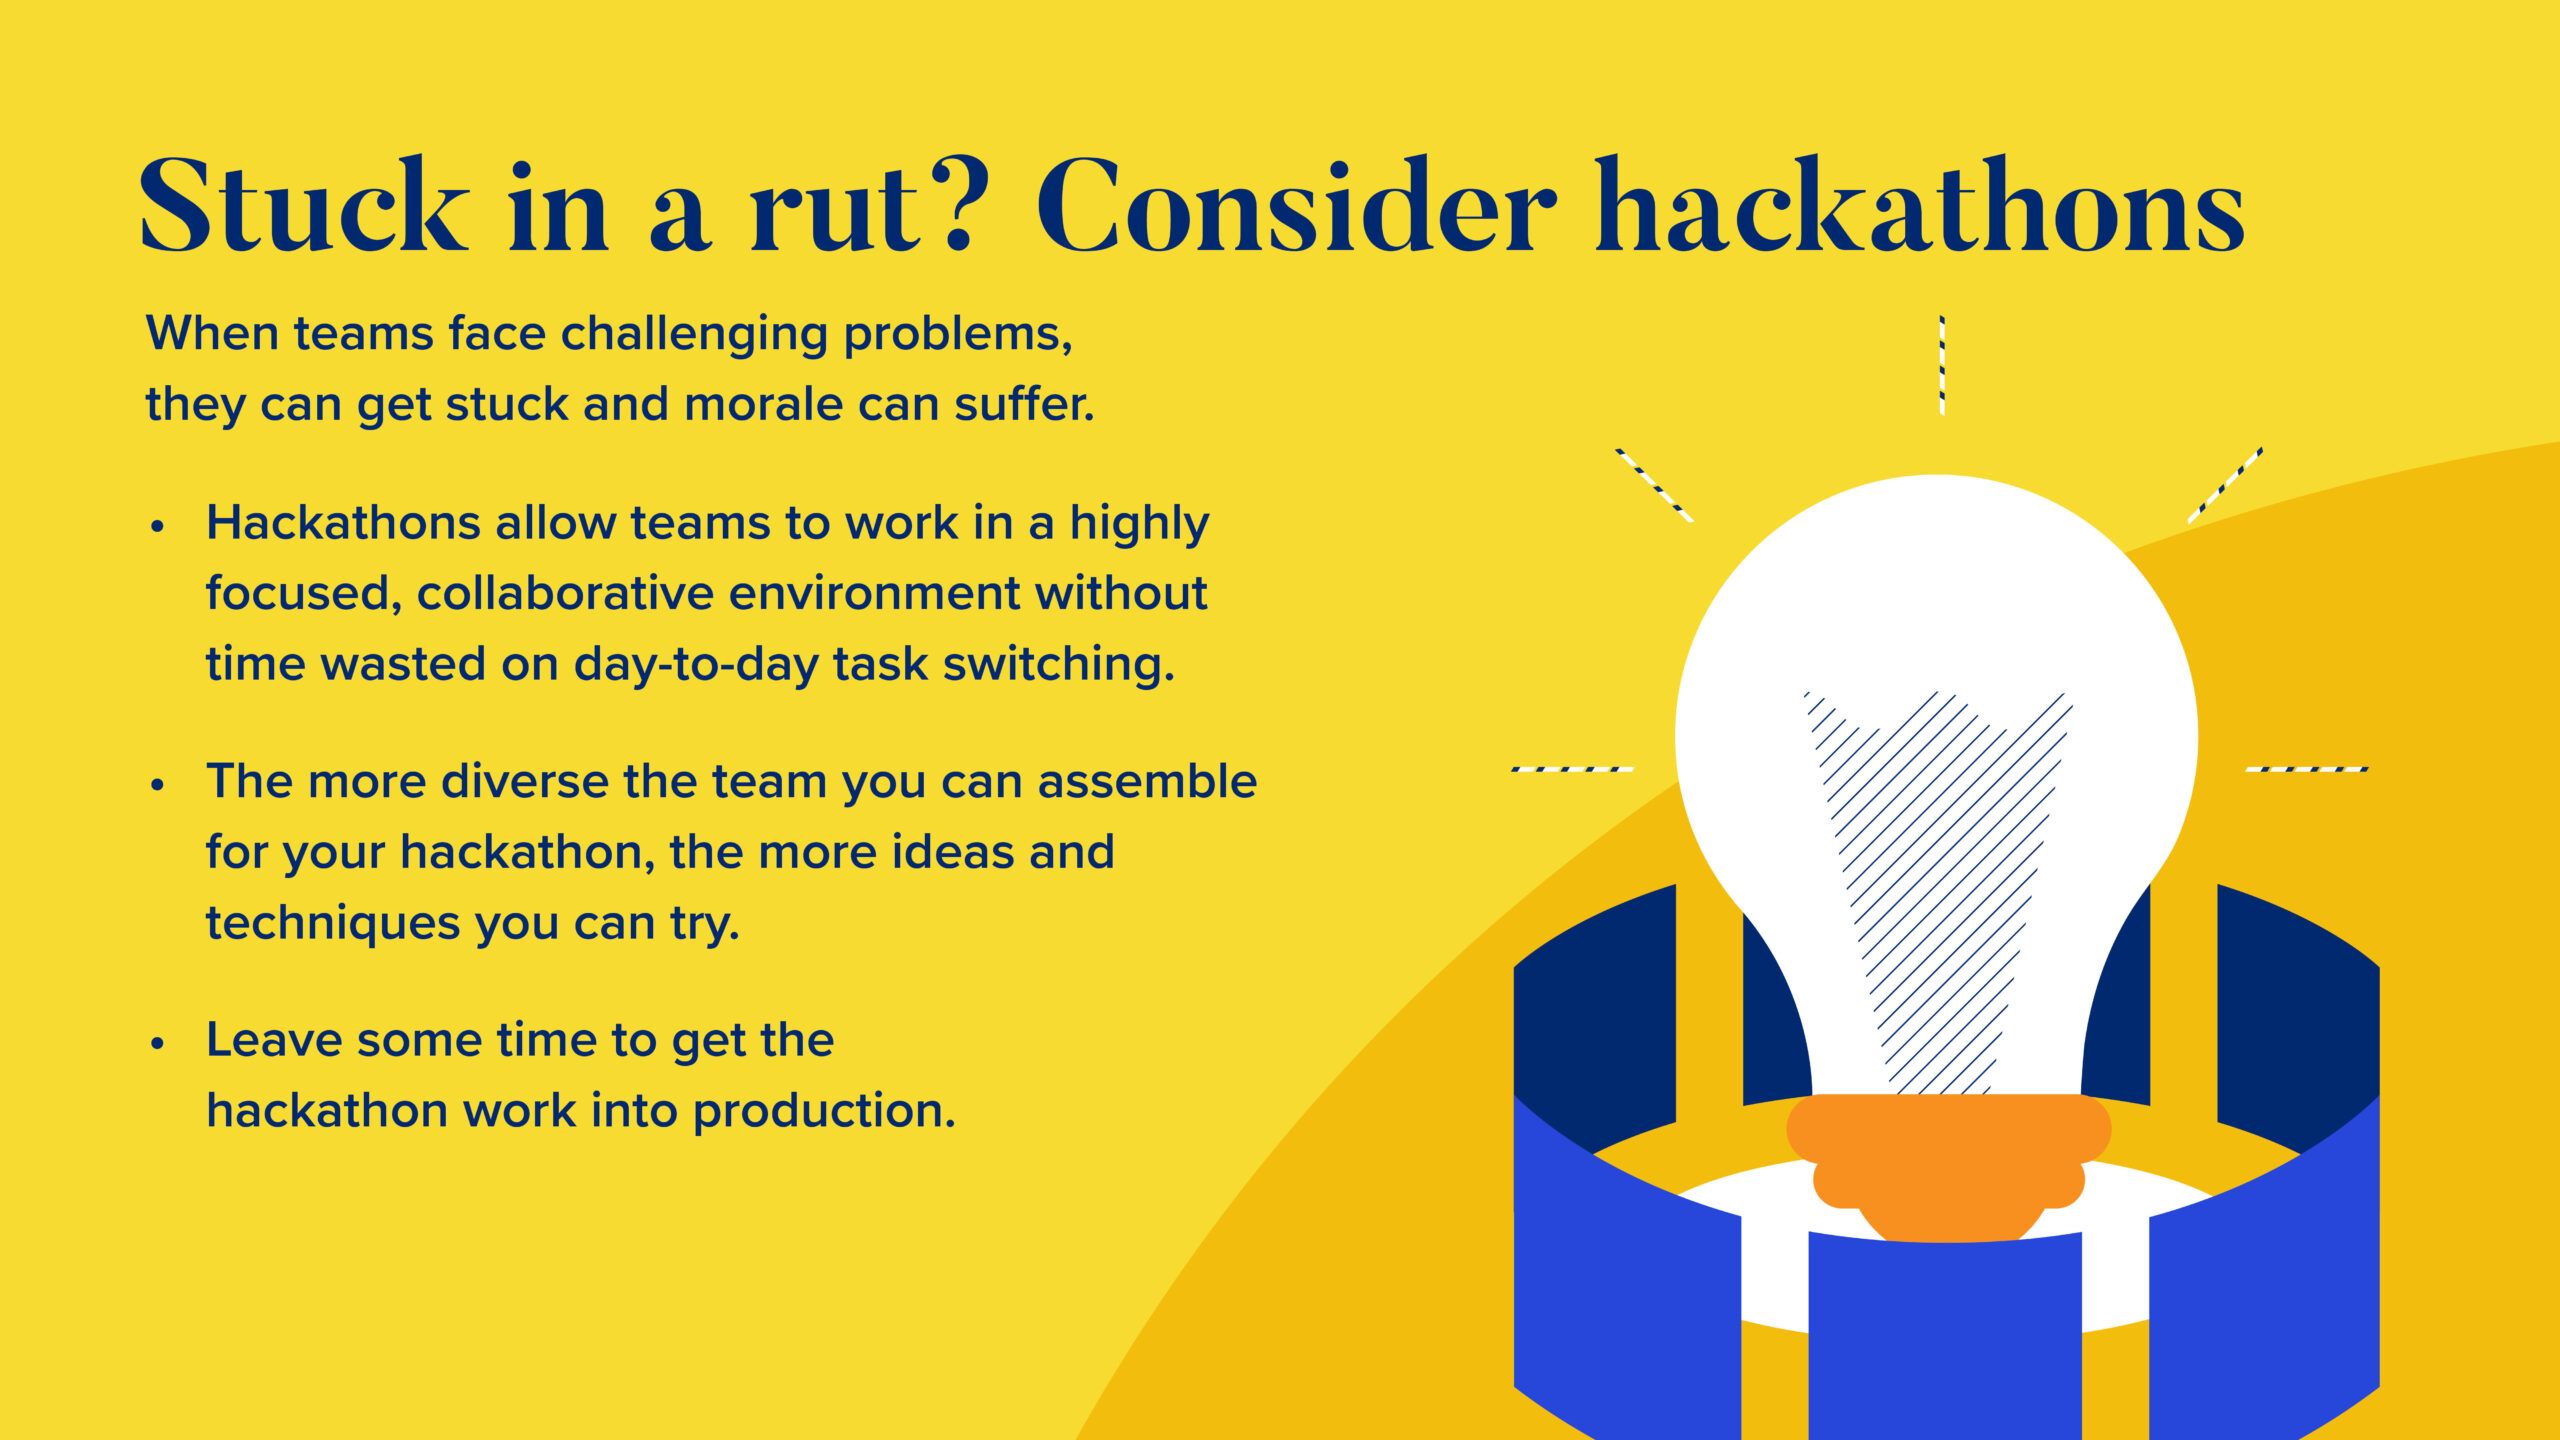 INFOGRAPHIC #4: Stuck in a rut? Consider hackathons  When teams face challenging problems, they can get stuck and morale can suffer.  Hackathons allow teams to work in a highly focused, collaborative environment without time wasted on day-to-day task switching. 
The more diverse the team you can assemble for your hackathon, the more ideas and techniques you can try.
Leave some time to get the hackathon work into production. 
